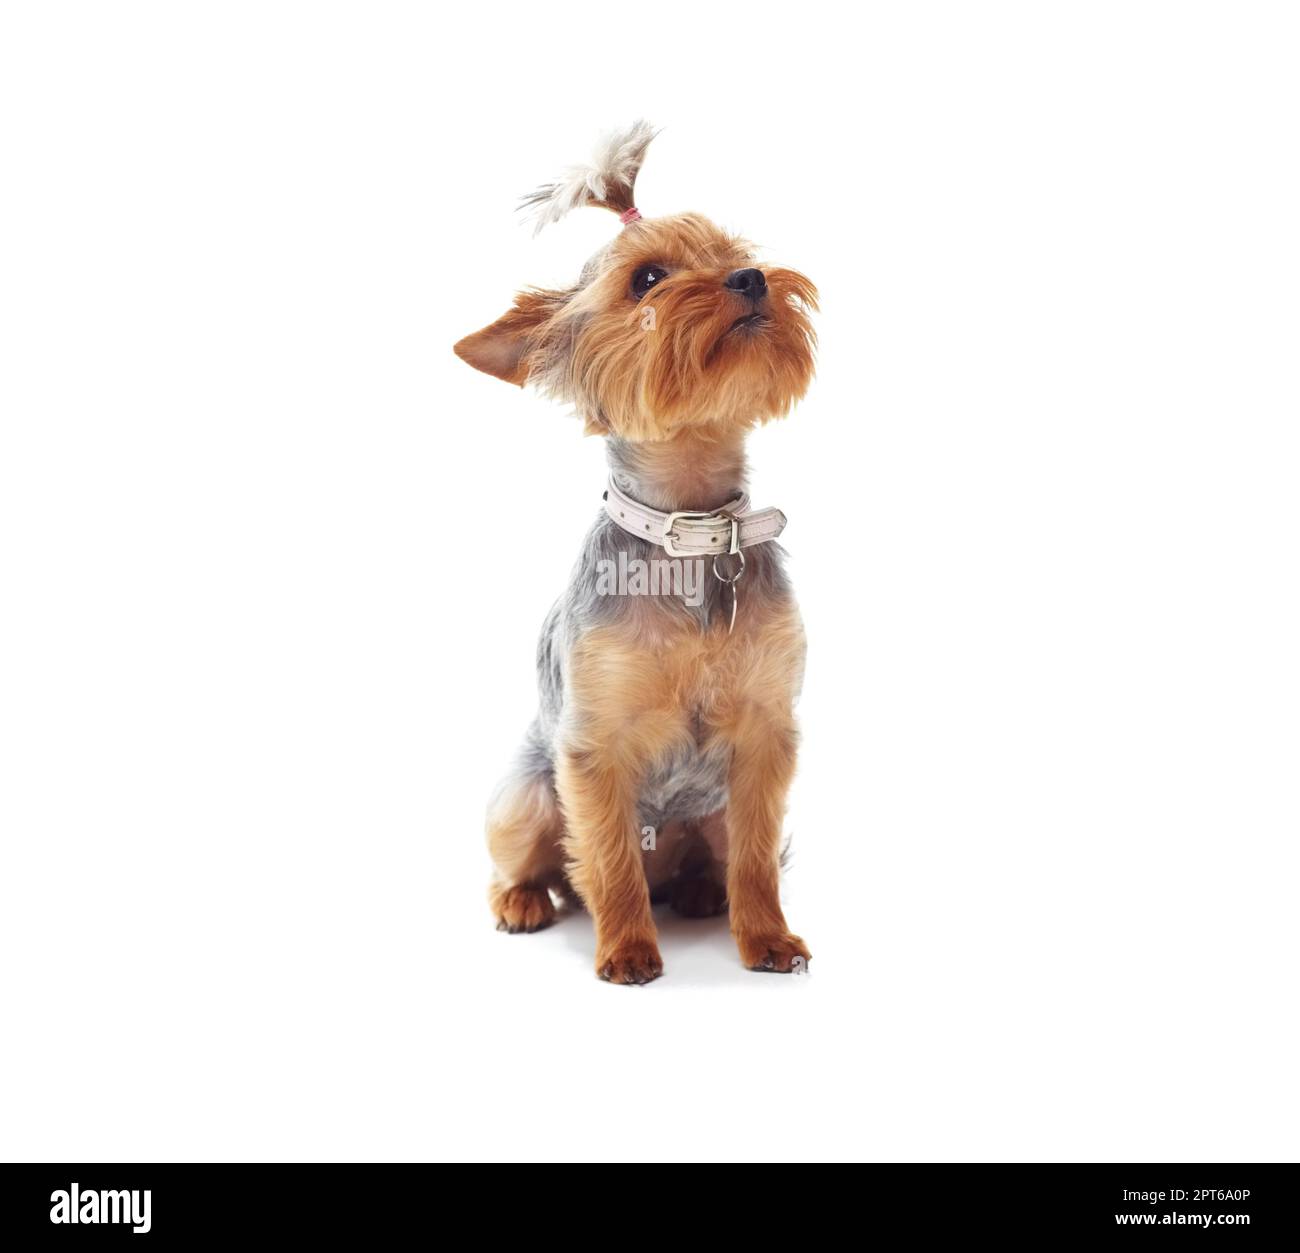 I wish I was bigger...Studio shot of a cute terrier looking upwards isolated on white Stock Photo